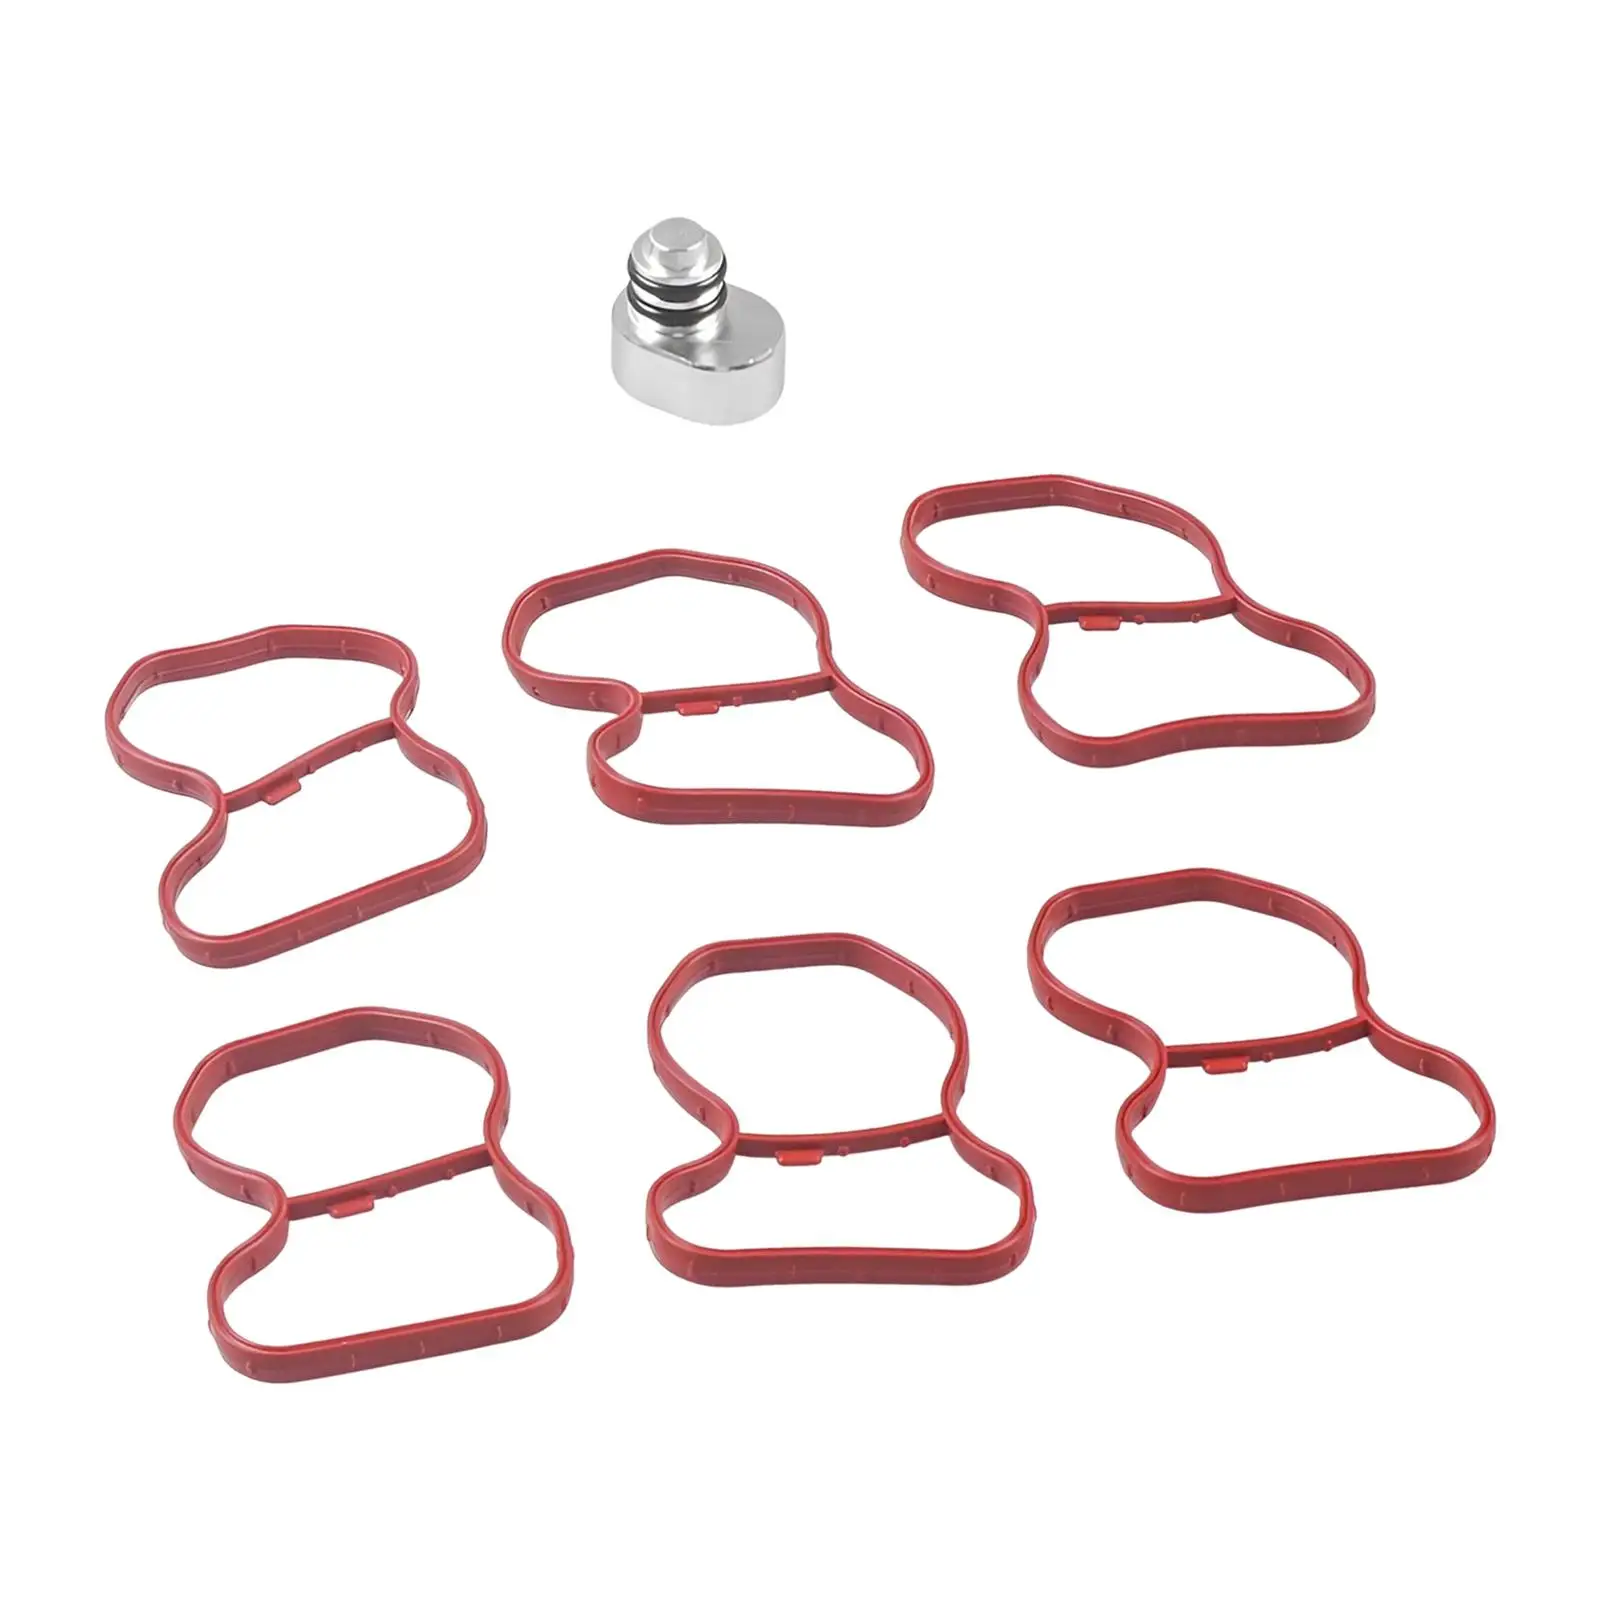 Swirl Flap Flaps Plug and Gaskets Replacement for N57 N57S F07 F10 F11